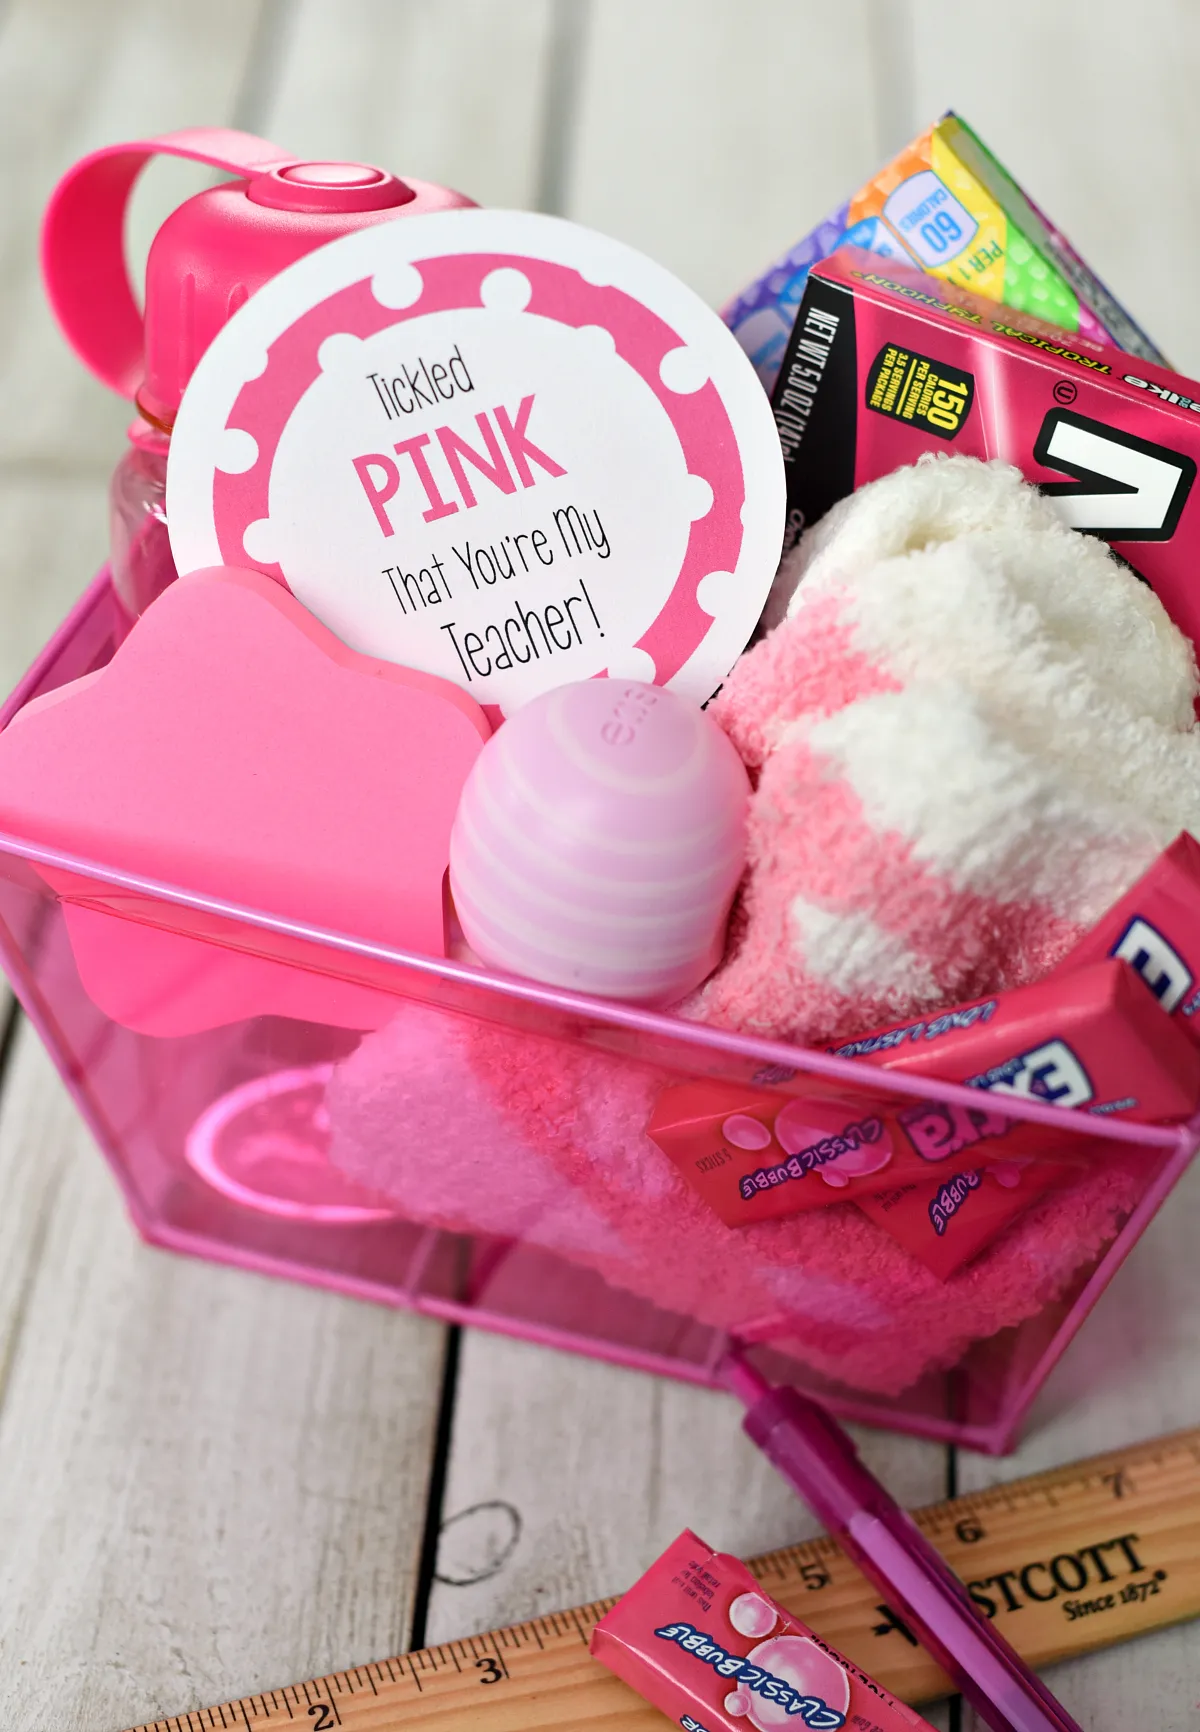 Tickled Pink Gift Idea: